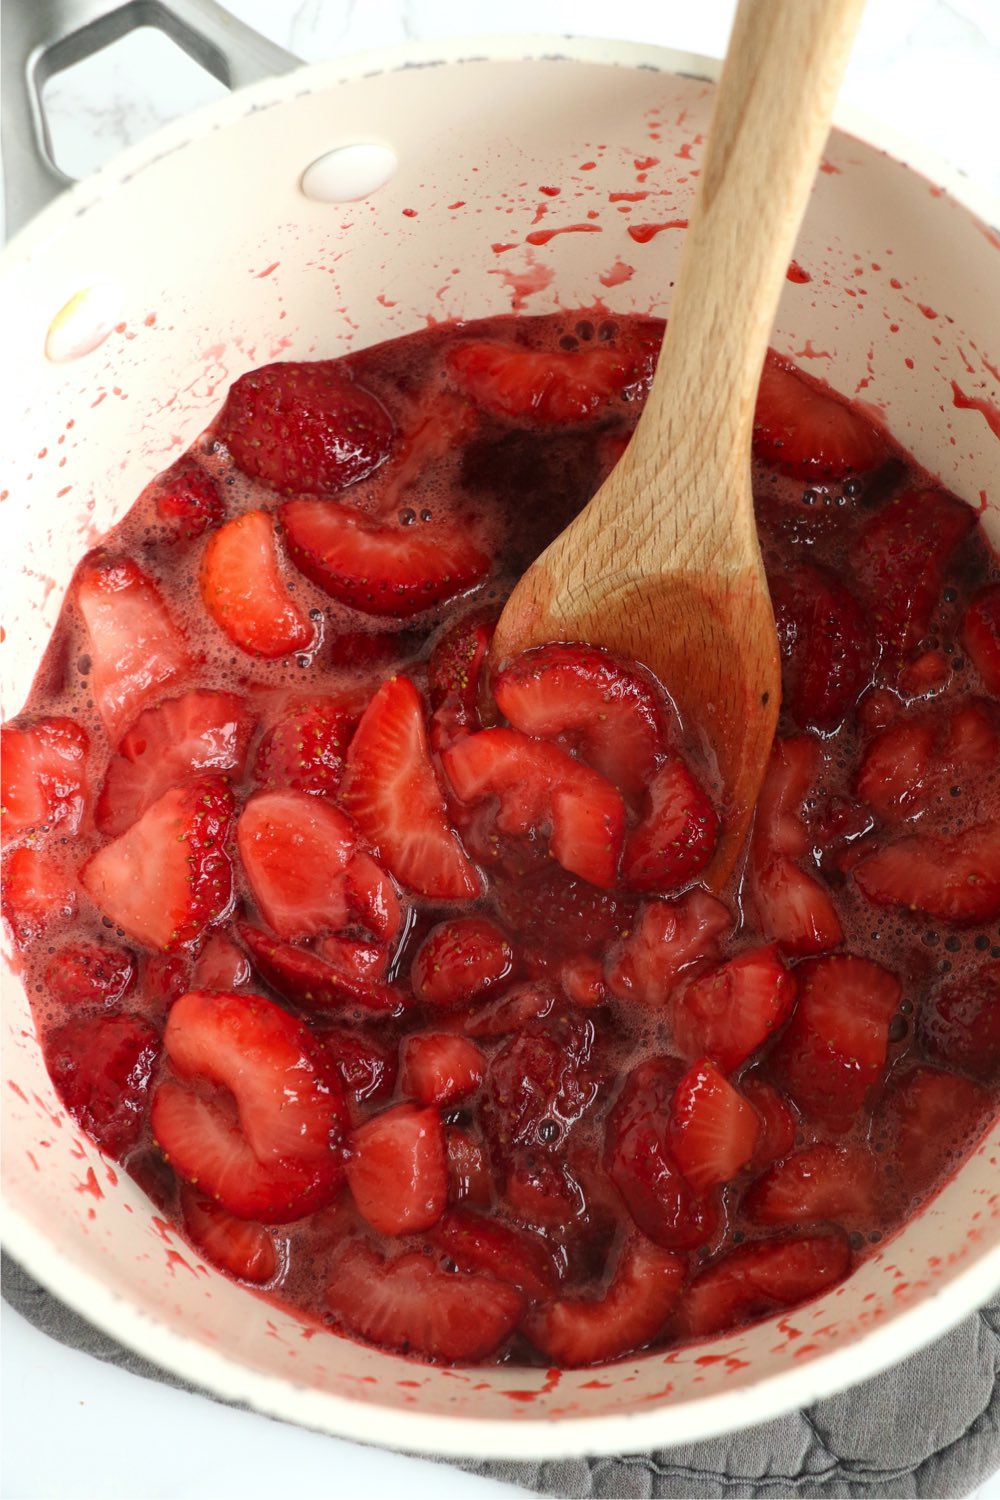 Making a strawberry sauce